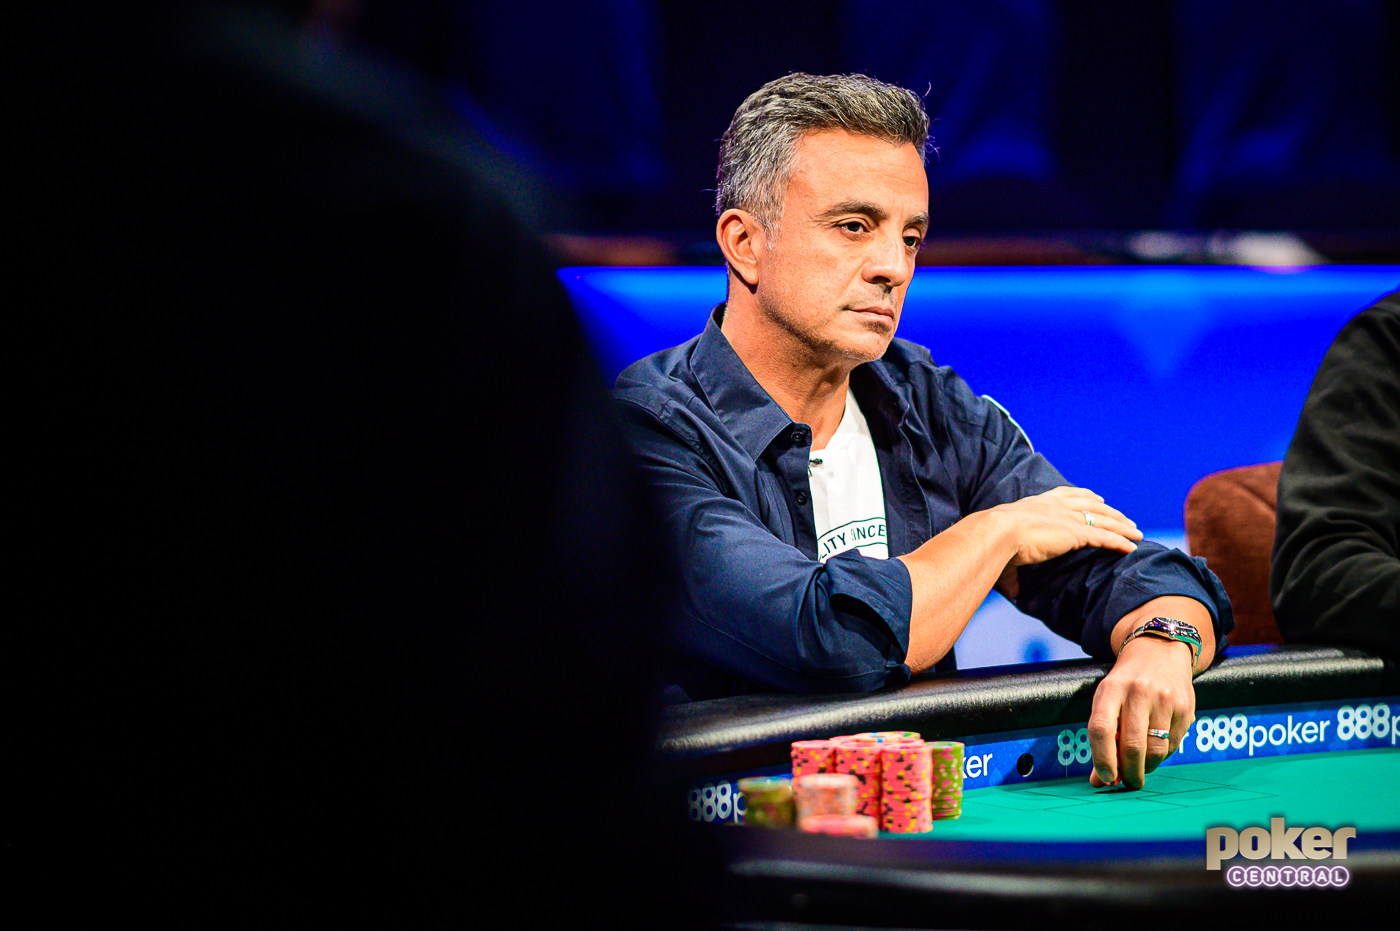 Joe Hachem in action during the 2019 World Series of Poker.